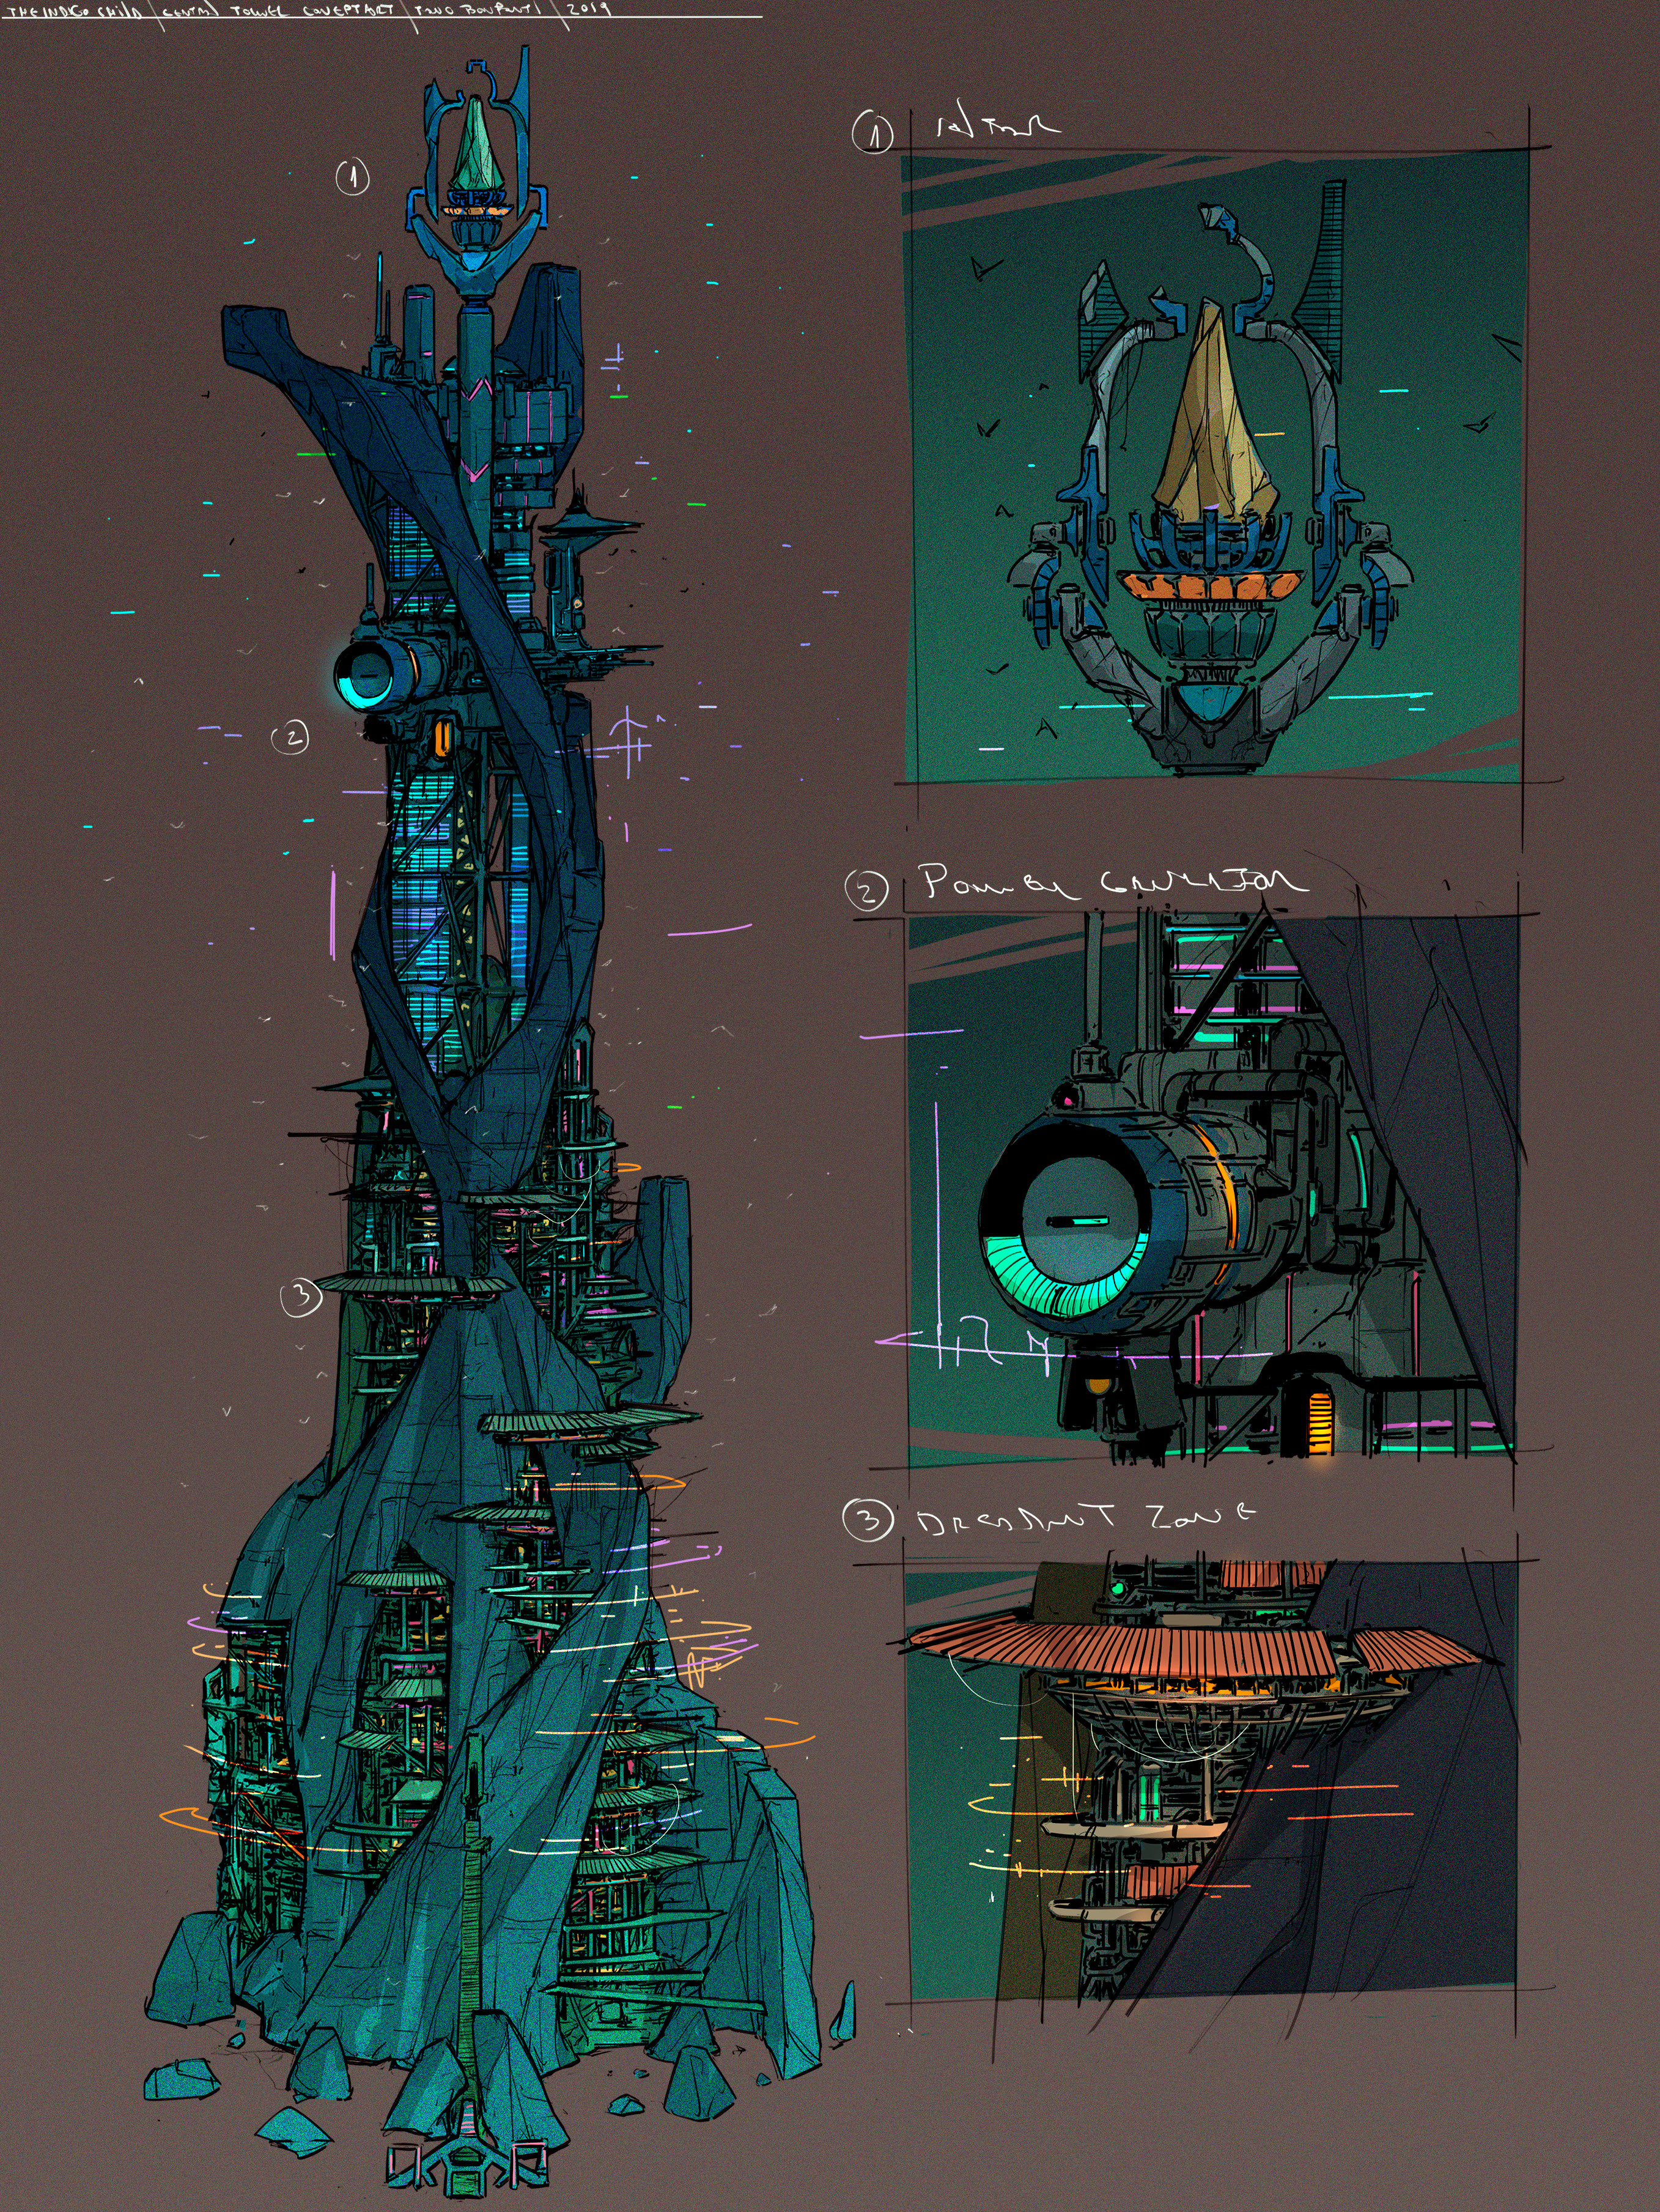 Defining some interesting elements of the tower